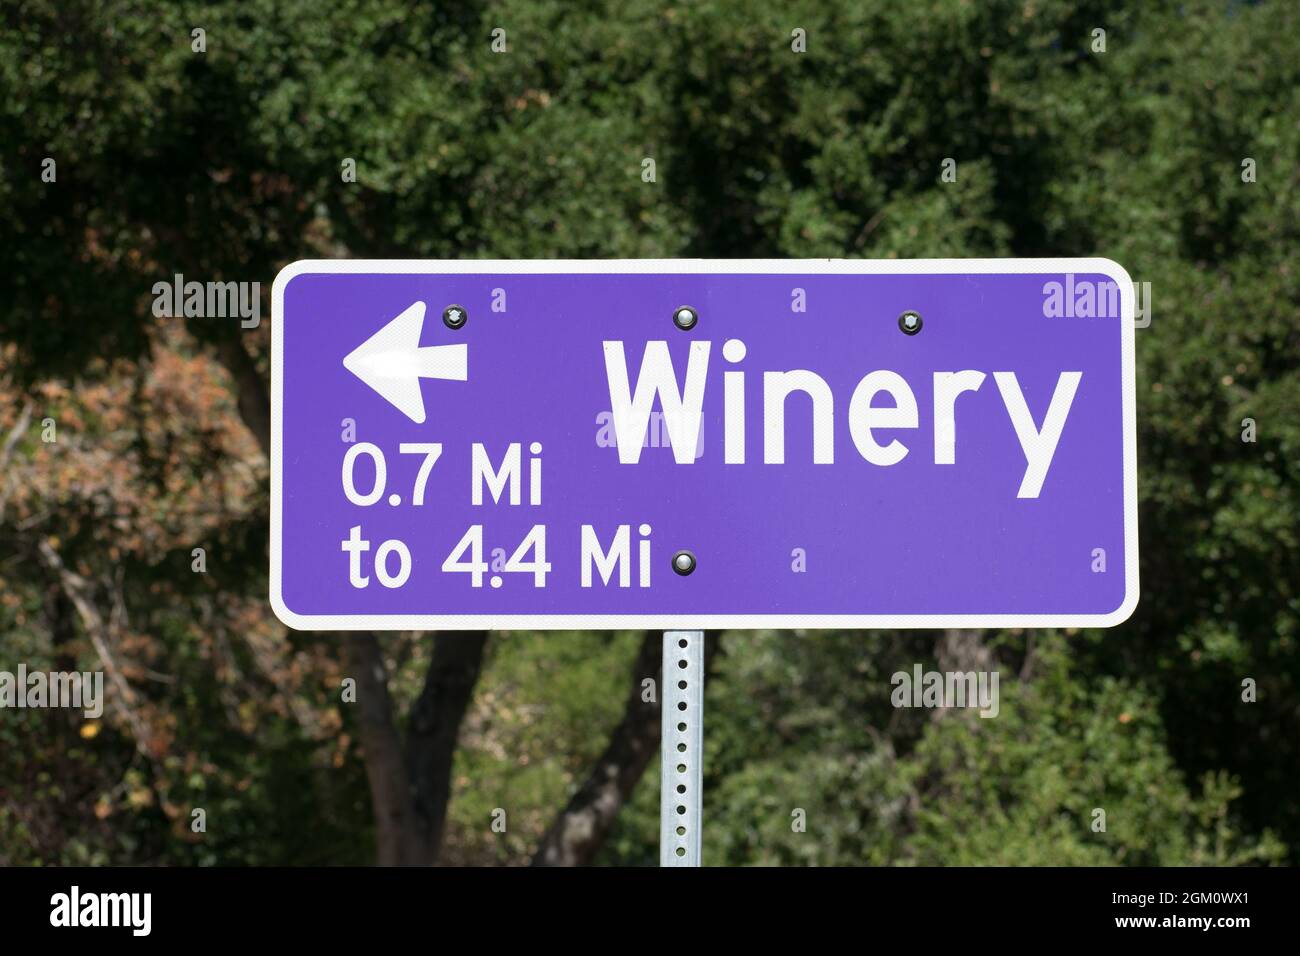 Winery road sign with arrow and distance in miles directs visitors to nearby wineries. Stock Photo